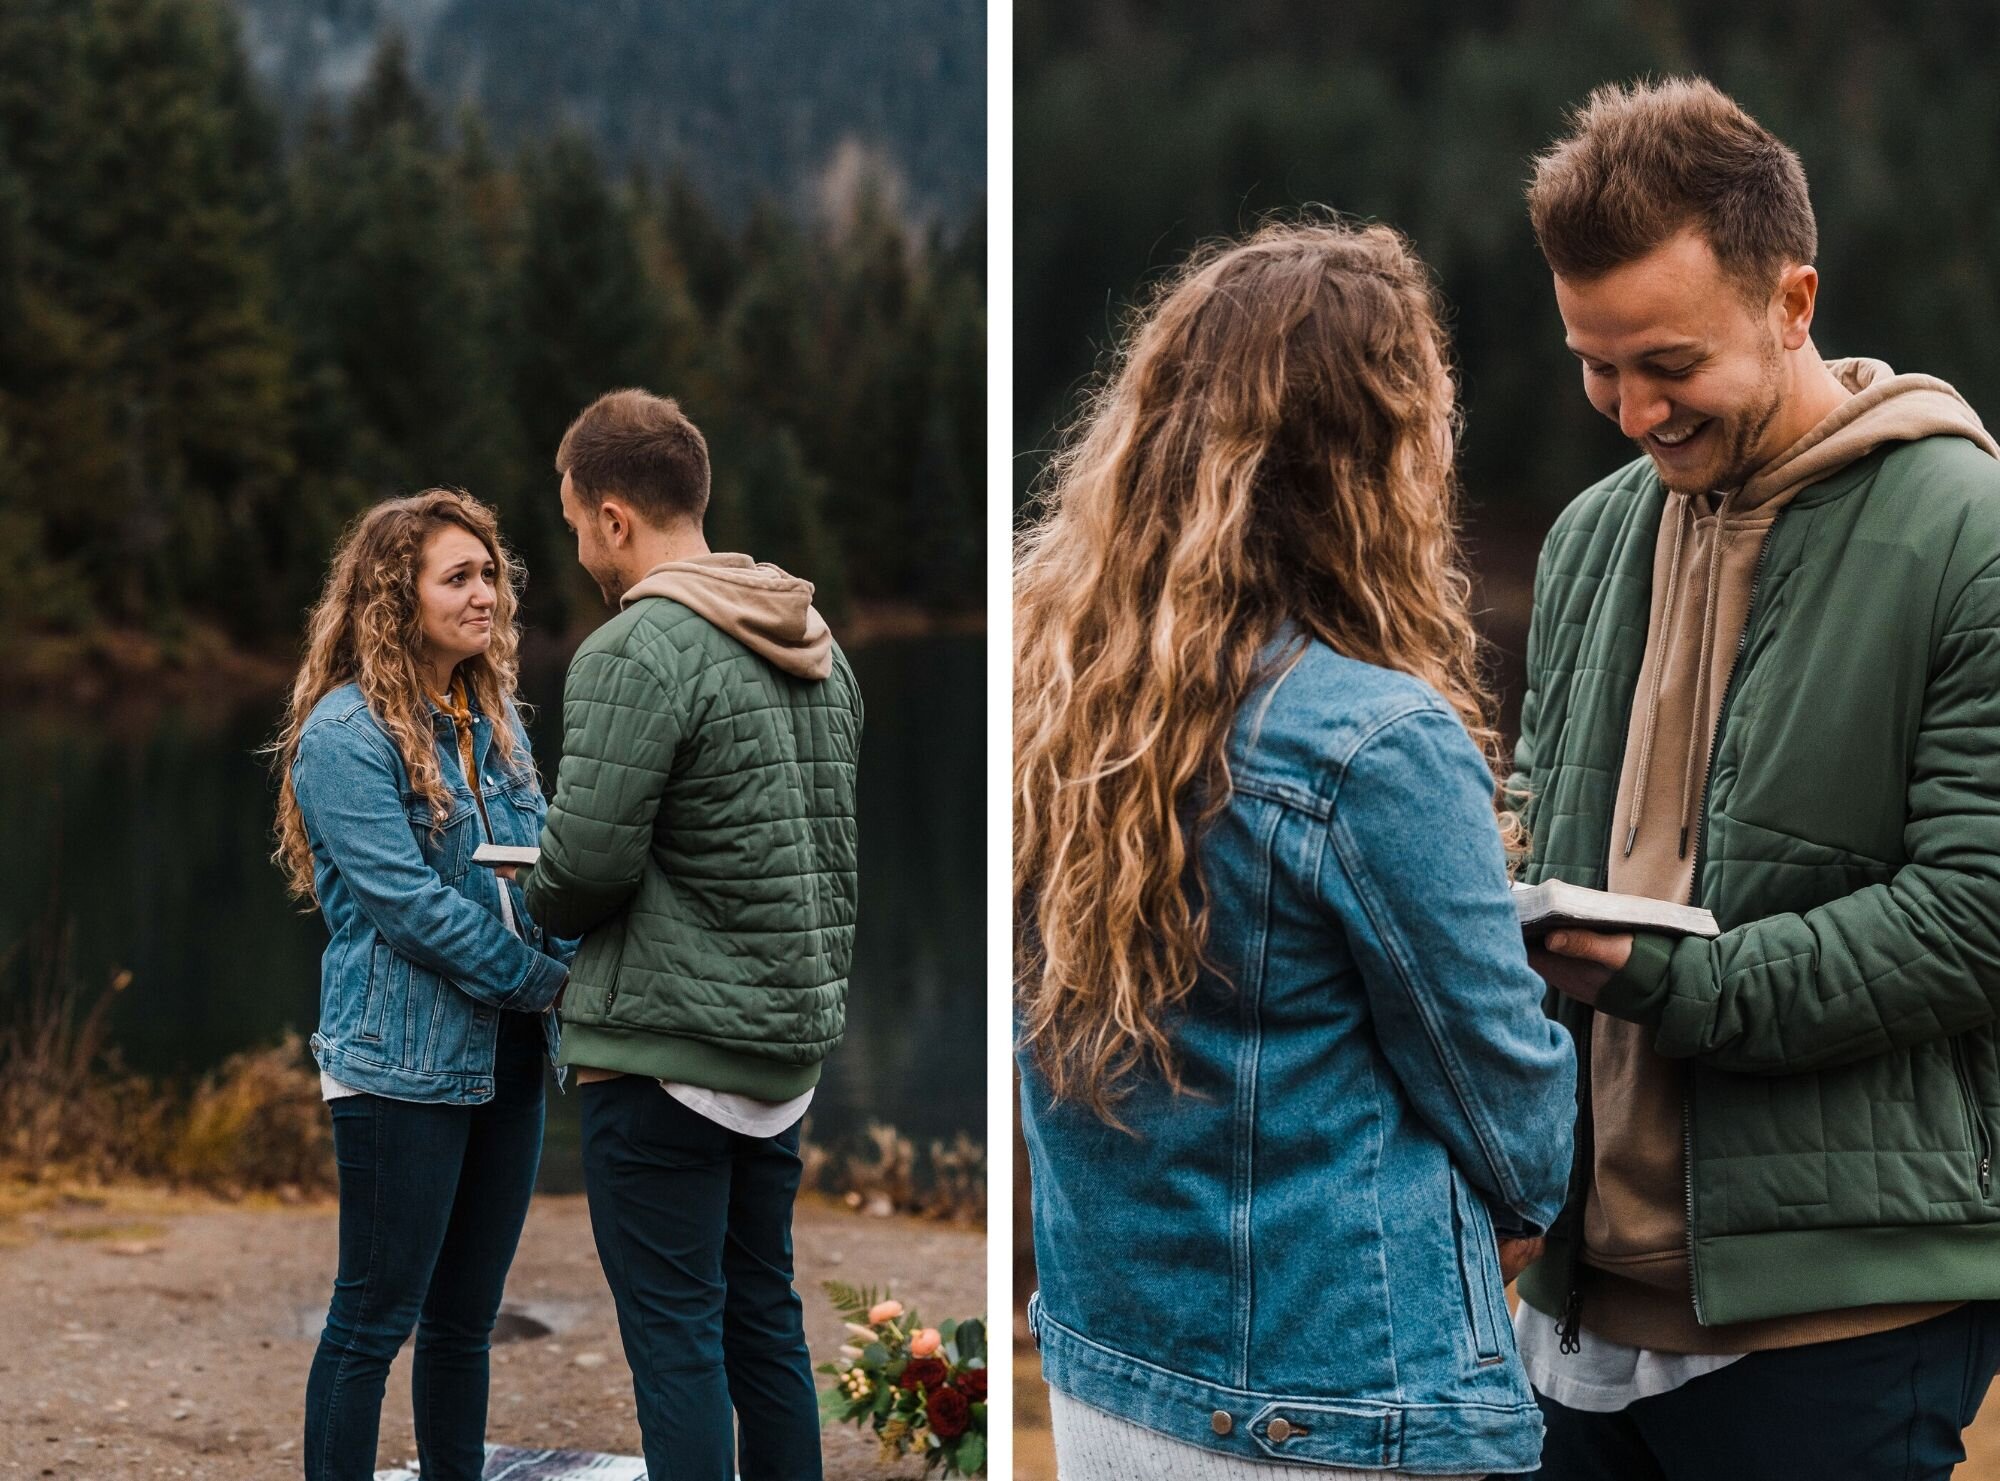 Mountaintop Surprise Proposal at Gold Creek Pond | Between the Pine Adventure Elopement Photography